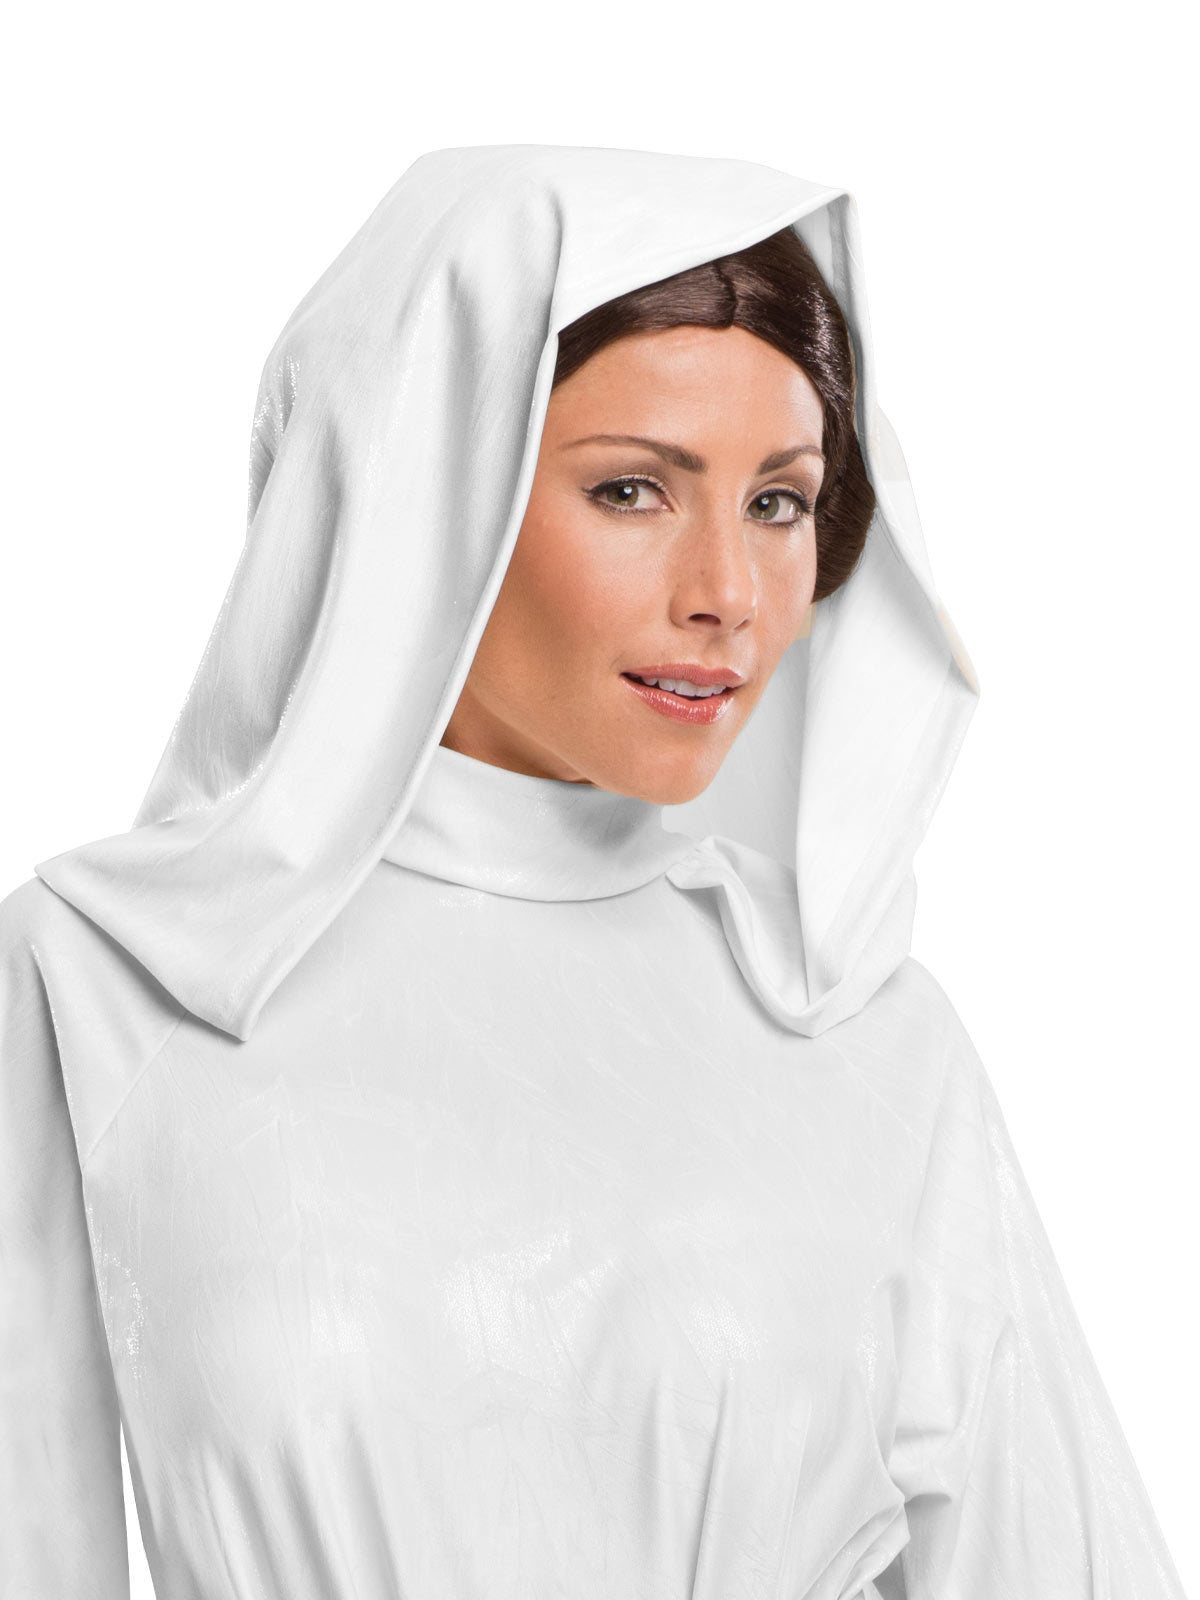 Star Wars Deluxe Princess Leia Womens Costume